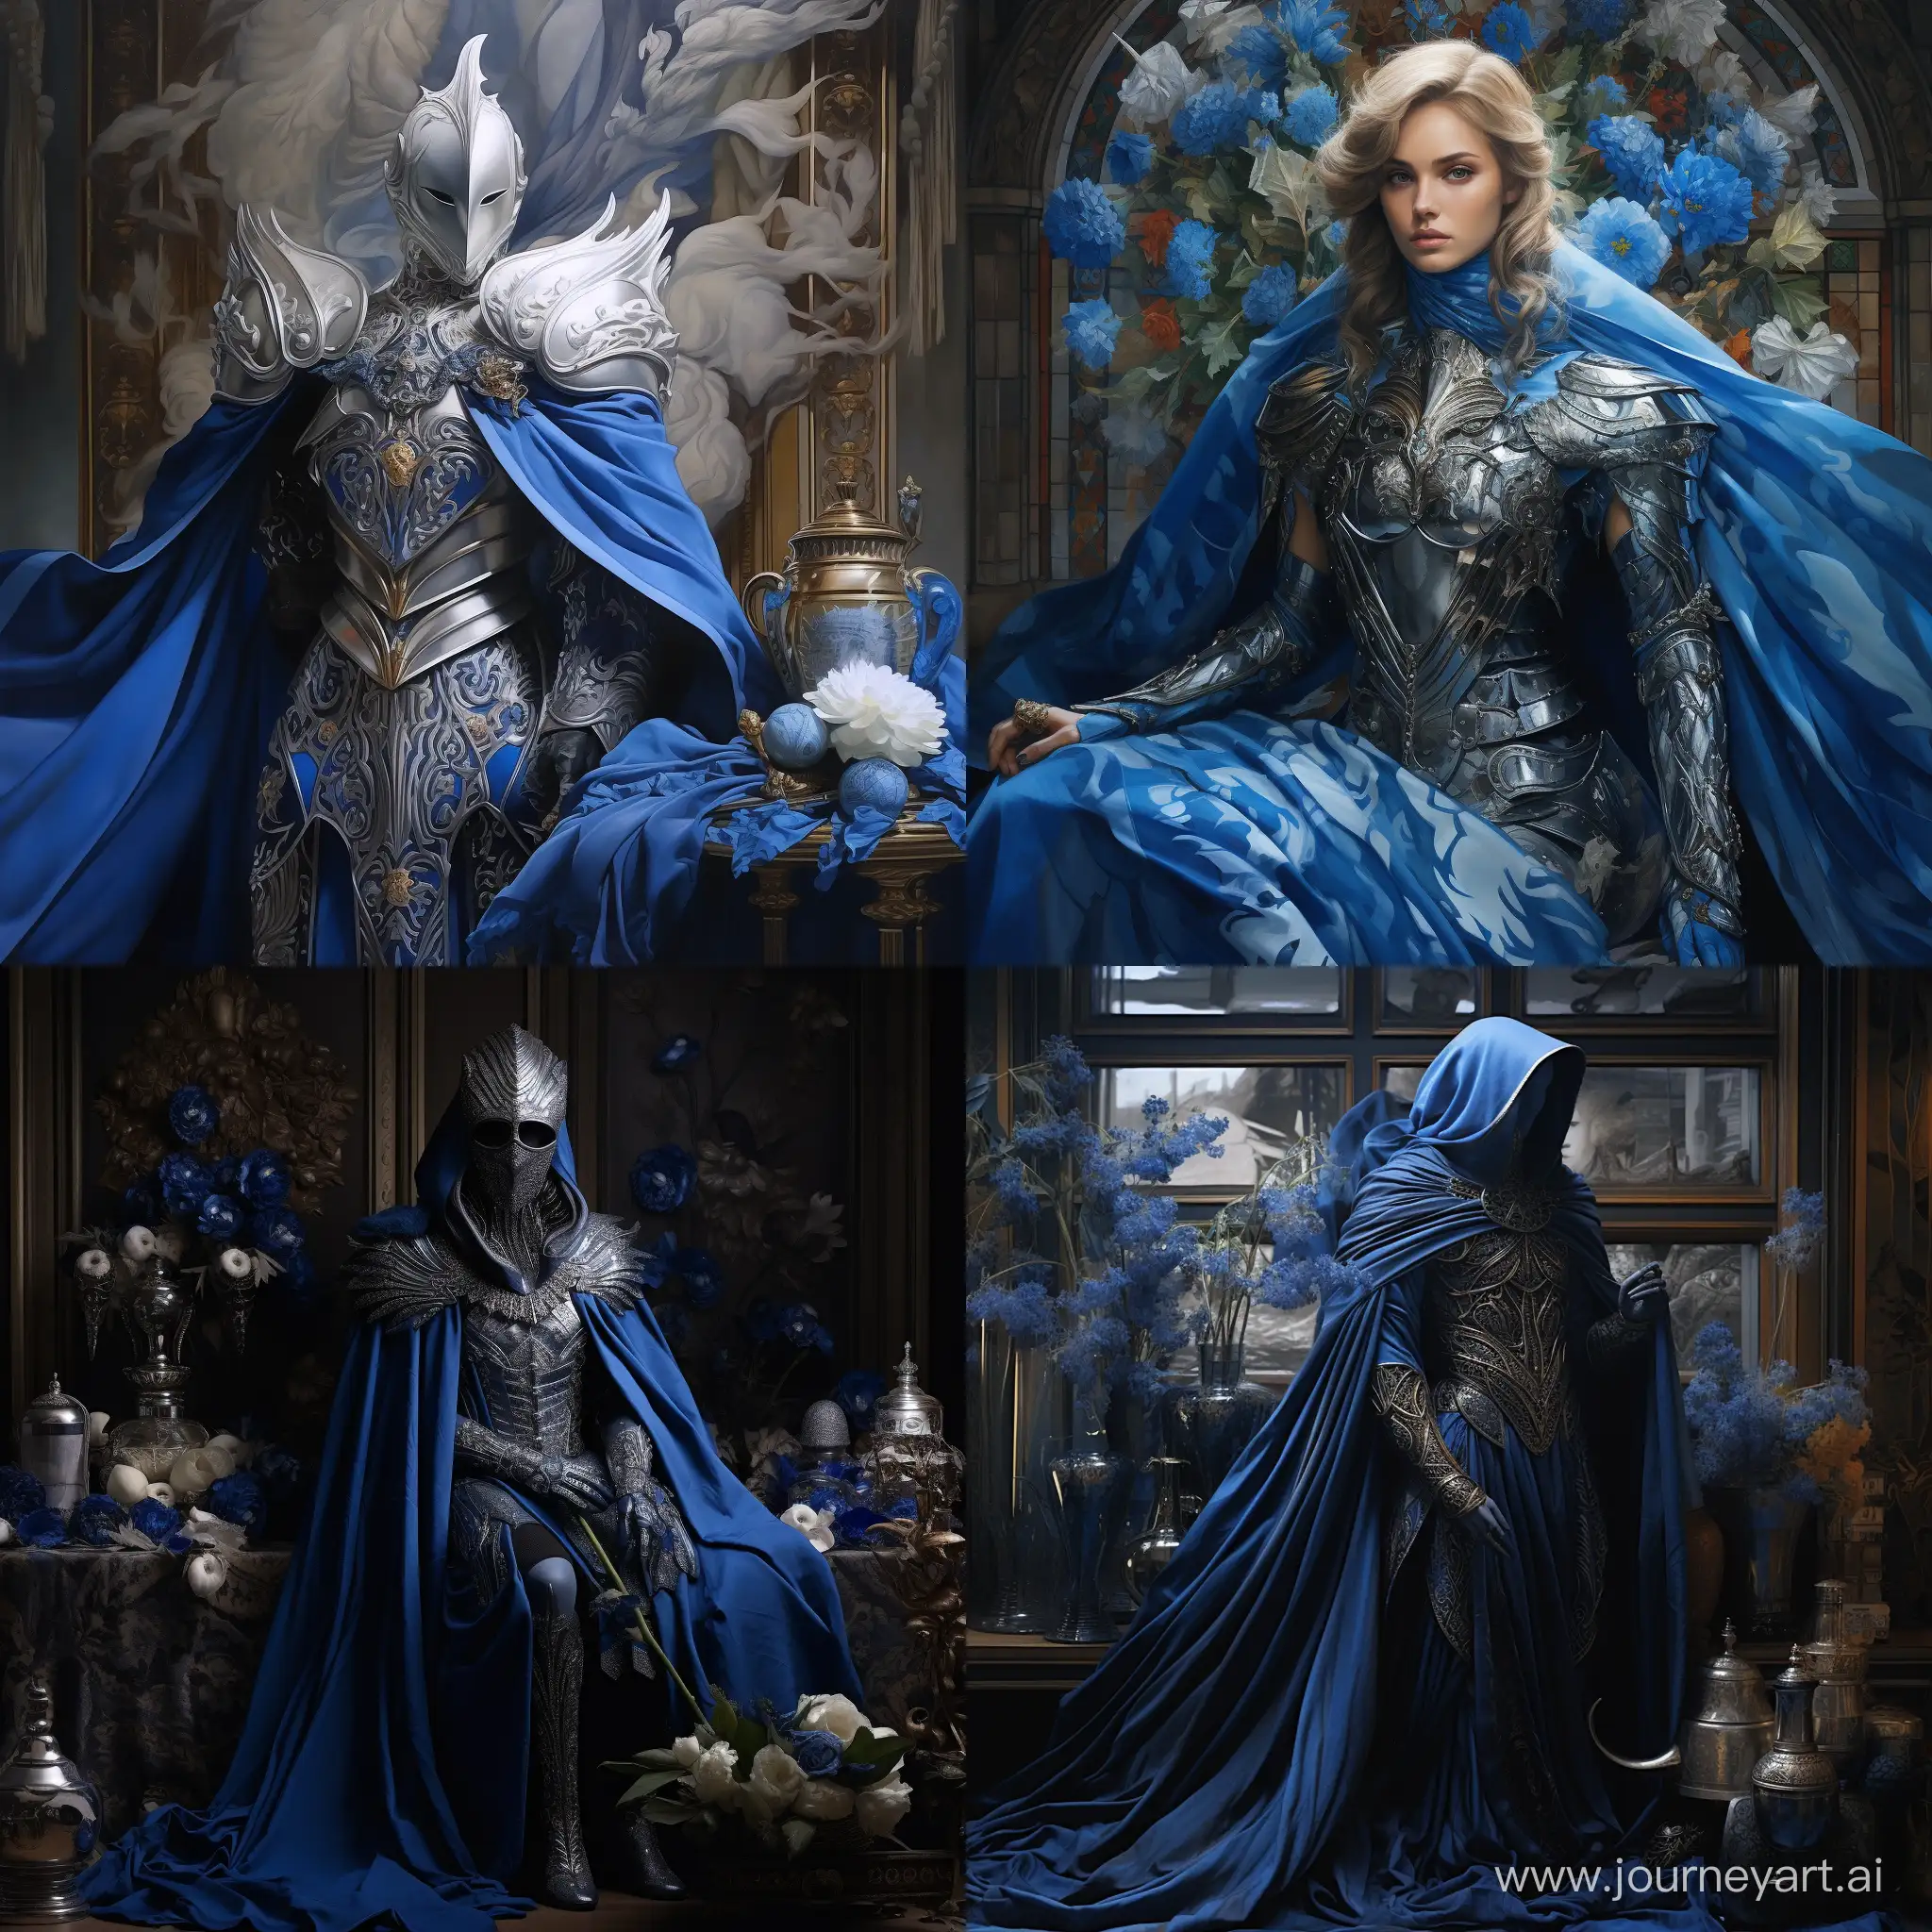 BlueCaped-Knight-Adorned-with-Ornaments-in-a-11-Aspect-Ratio